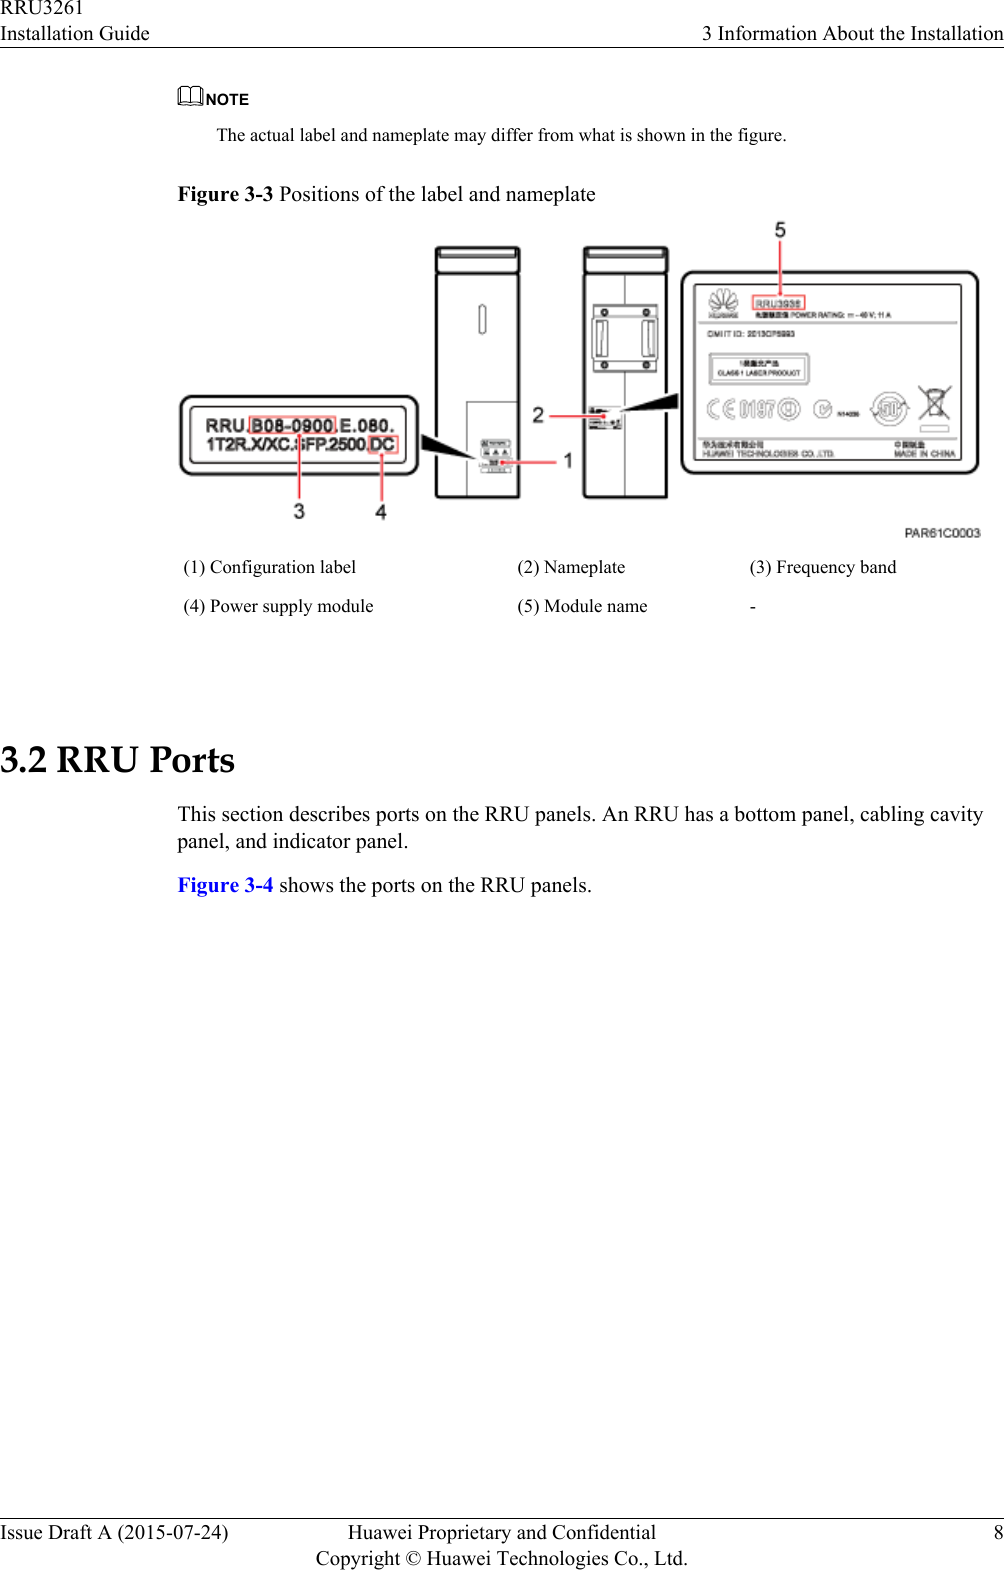 NOTEThe actual label and nameplate may differ from what is shown in the figure.Figure 3-3 Positions of the label and nameplate(1) Configuration label (2) Nameplate (3) Frequency band(4) Power supply module (5) Module name - 3.2 RRU PortsThis section describes ports on the RRU panels. An RRU has a bottom panel, cabling cavitypanel, and indicator panel.Figure 3-4 shows the ports on the RRU panels.RRU3261Installation Guide 3 Information About the InstallationIssue Draft A (2015-07-24) Huawei Proprietary and ConfidentialCopyright © Huawei Technologies Co., Ltd.8